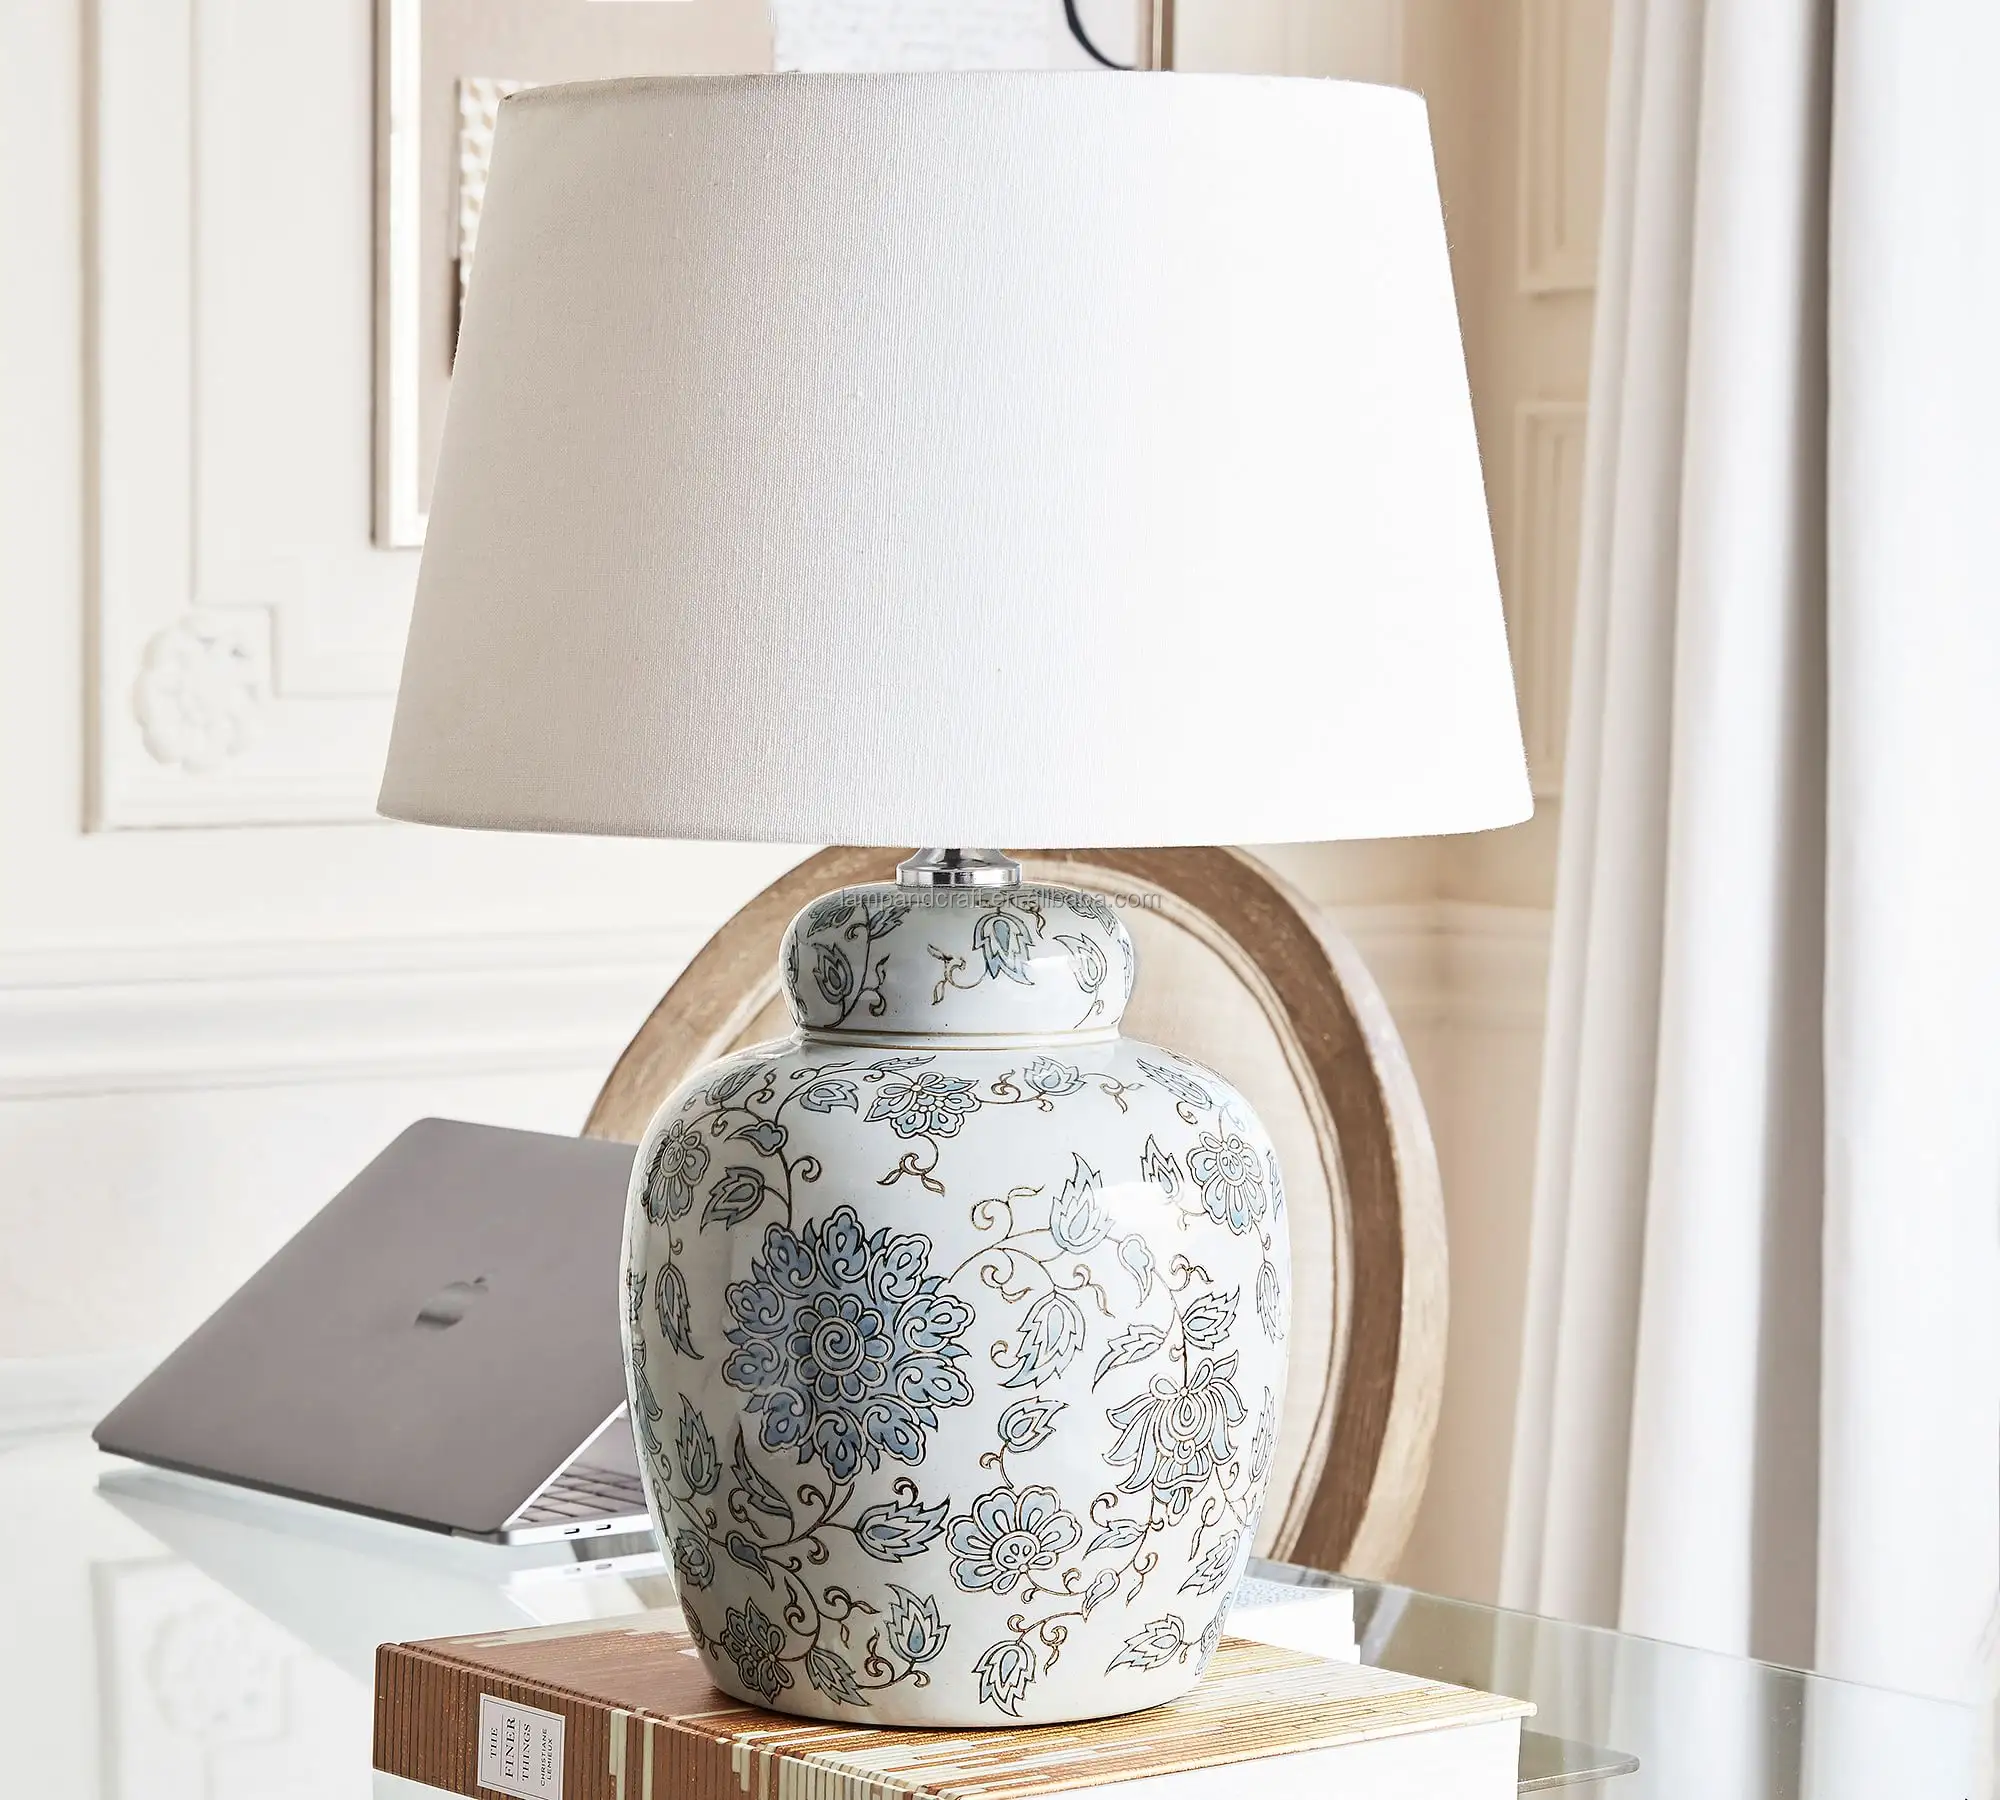 handmade ceramic table lamps with a hand painted Dark Blue finish